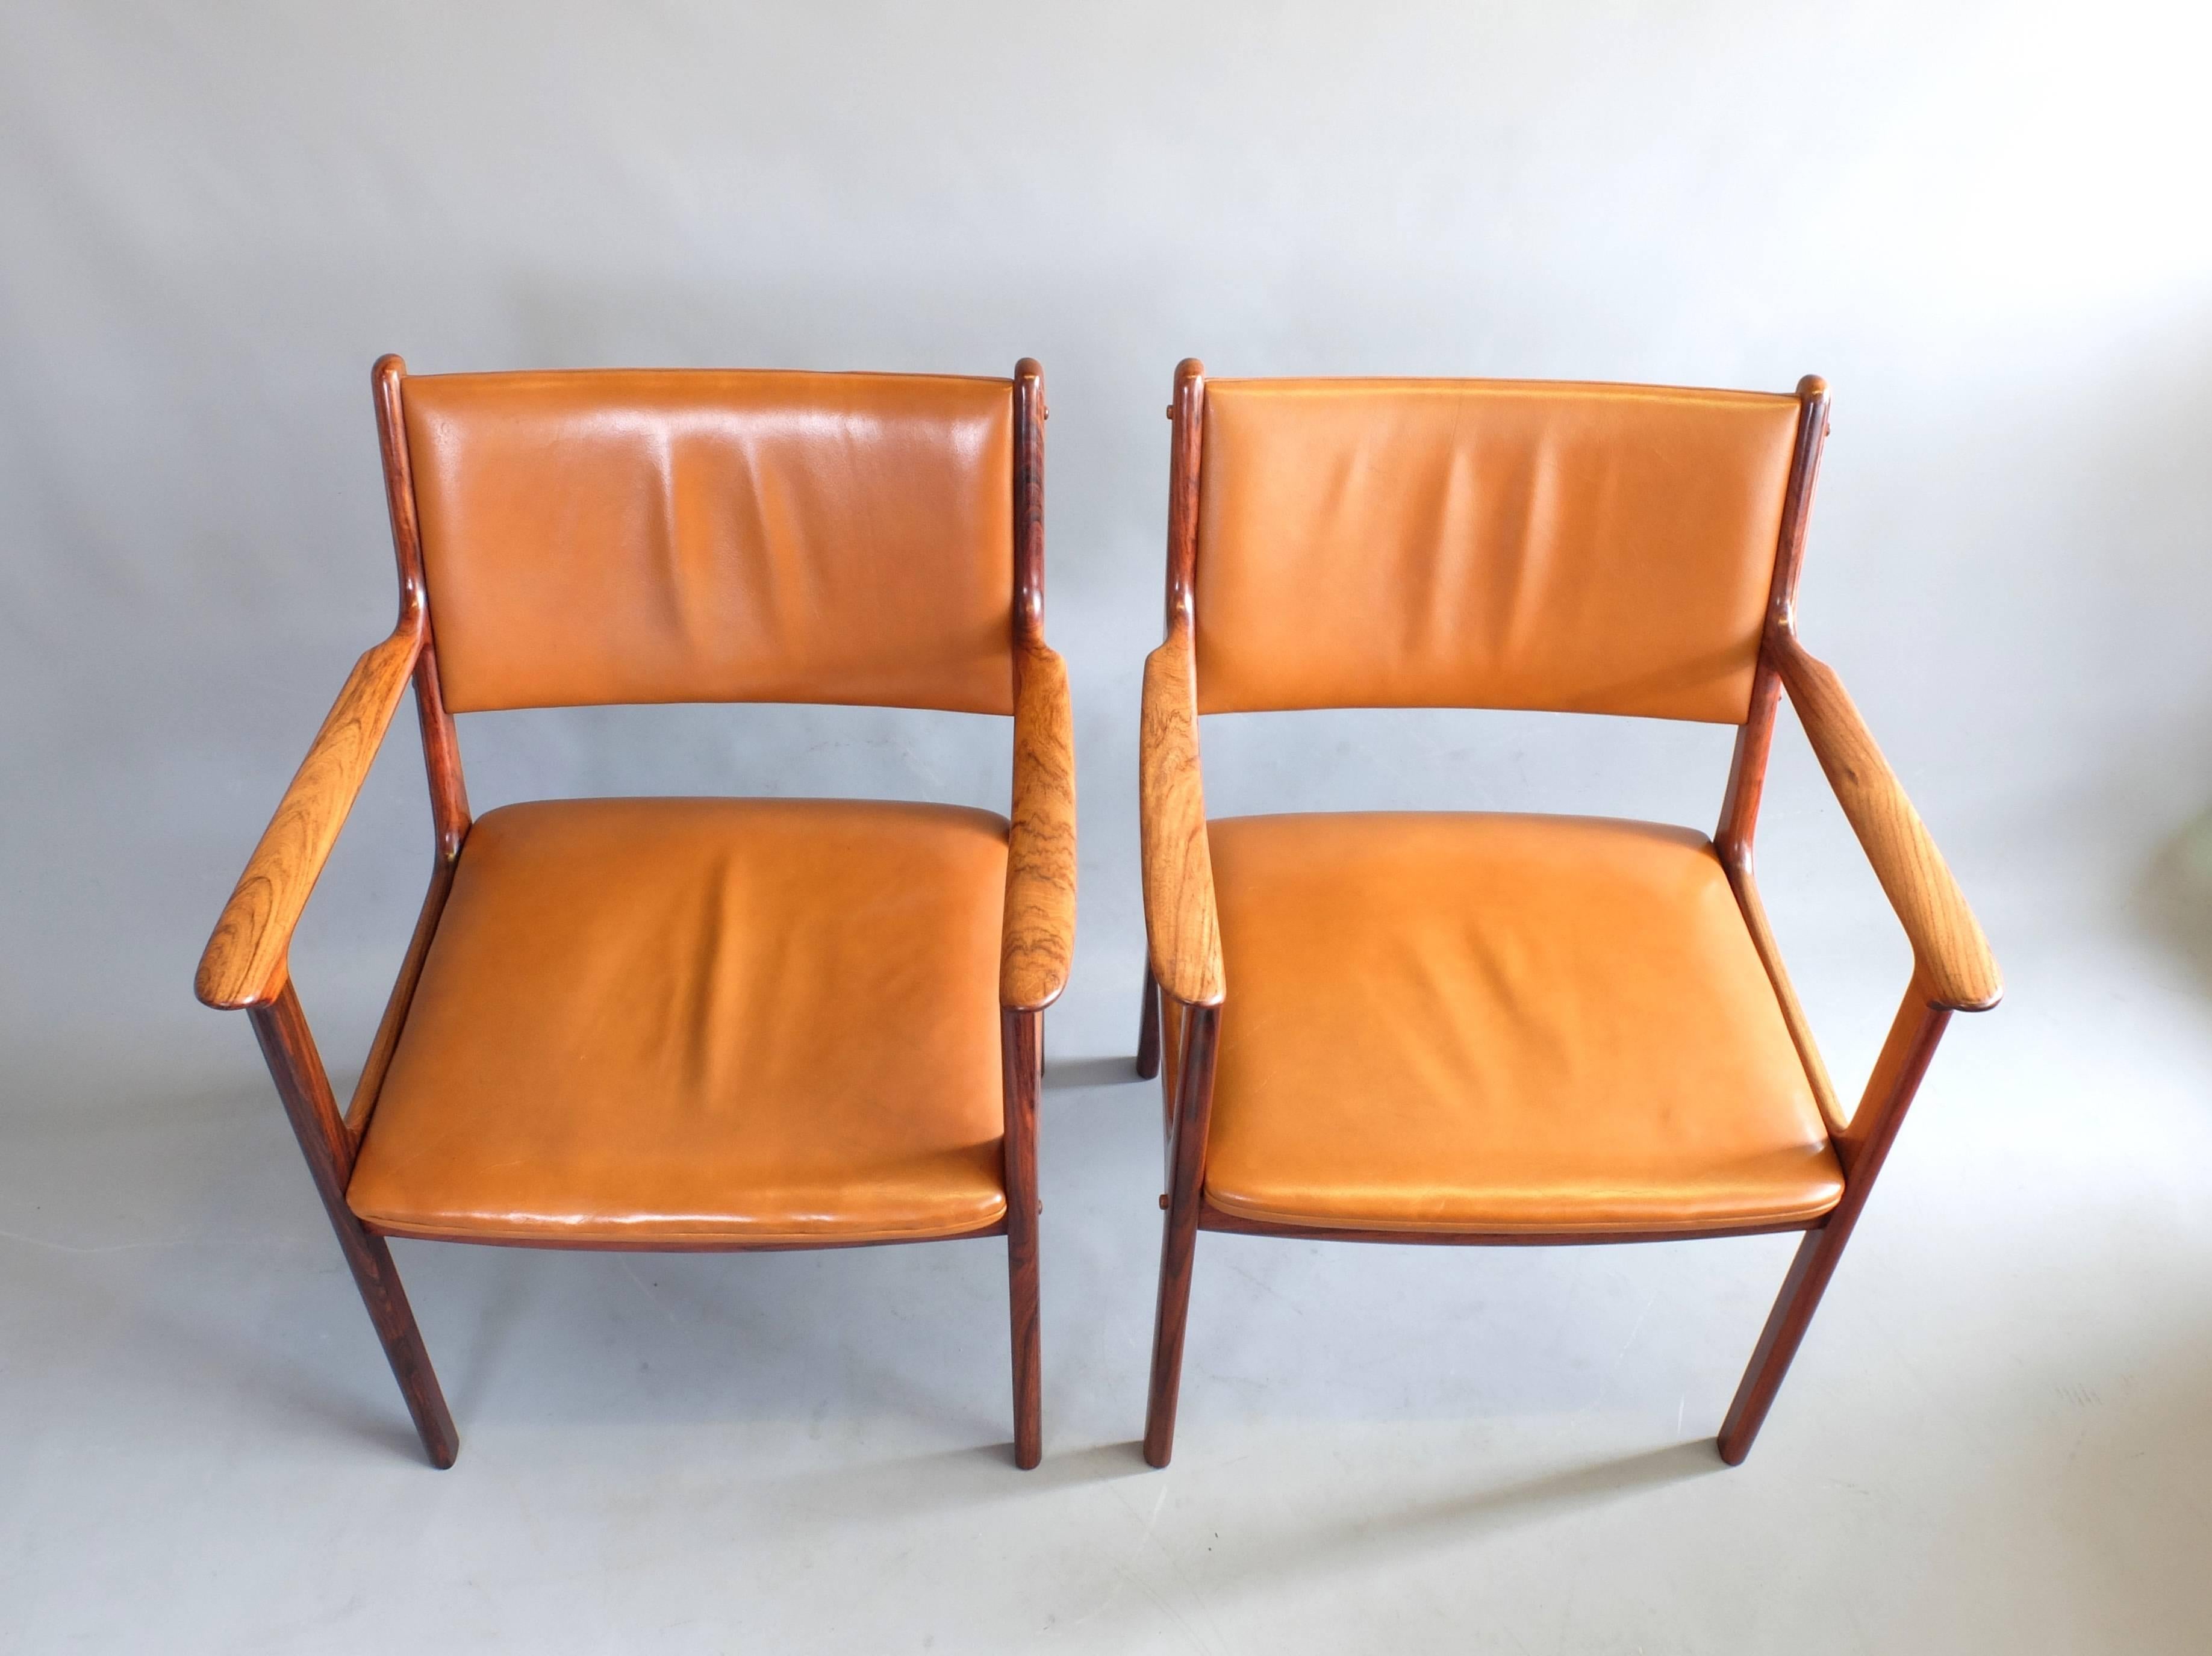 Ole Wanscher Model PJ412 for Poul Jeppesen Pair Armchairs 1960's Danish In Excellent Condition For Sale In London, GB